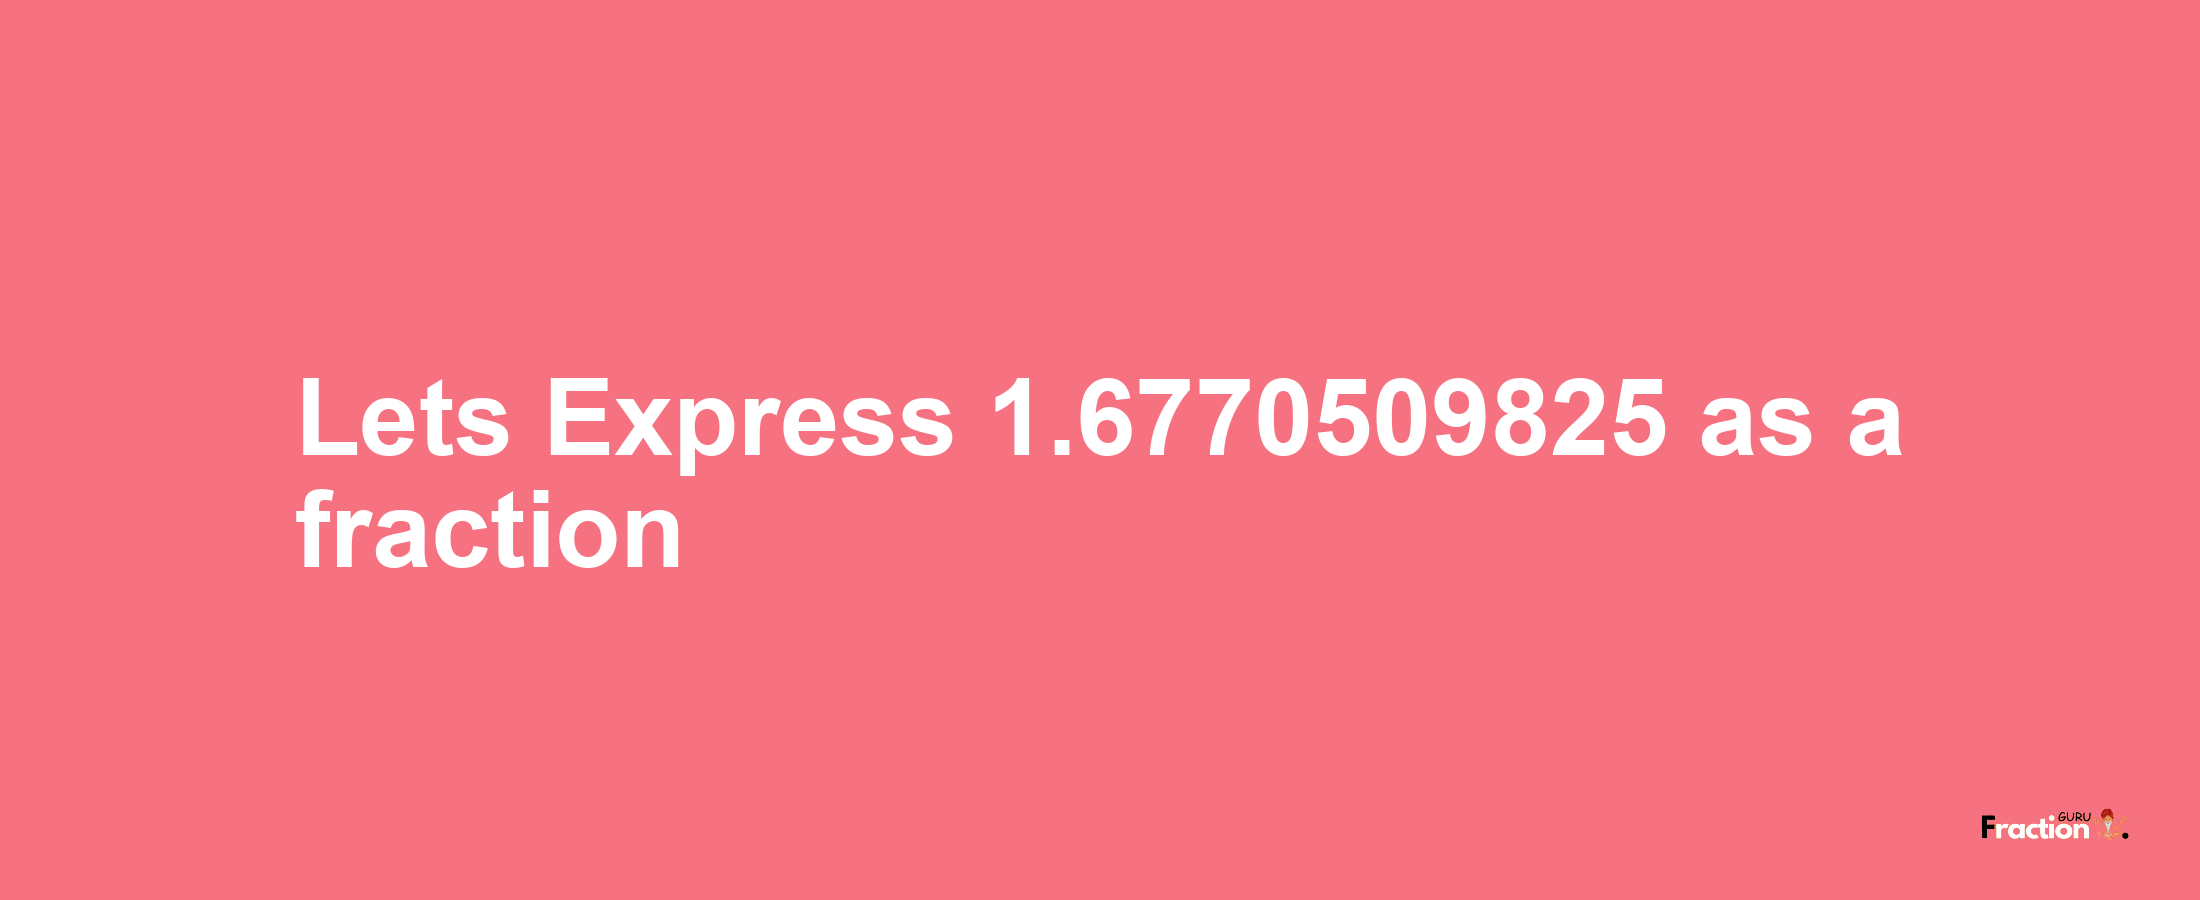 Lets Express 1.6770509825 as afraction